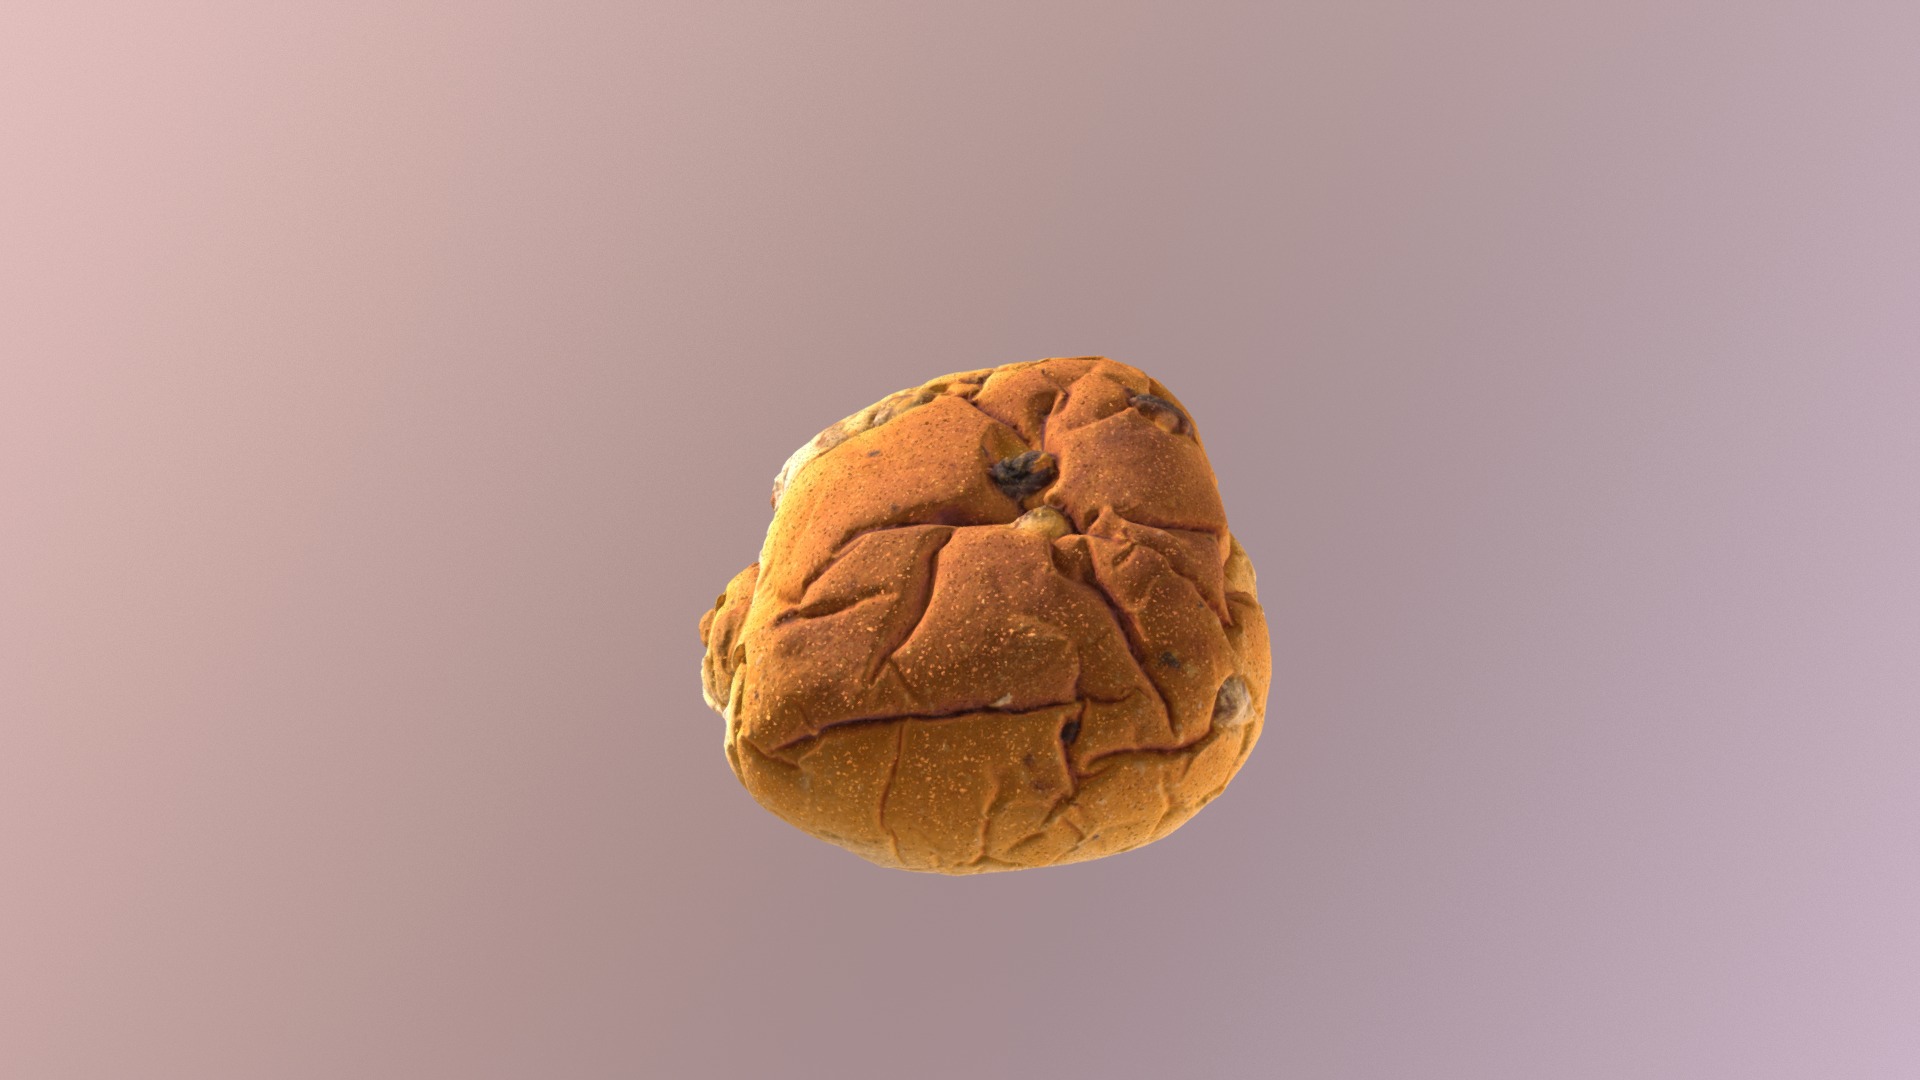 3D model two buns with raisins - This is a 3D model of the two buns with raisins. The 3D model is about a close up of a walnut.